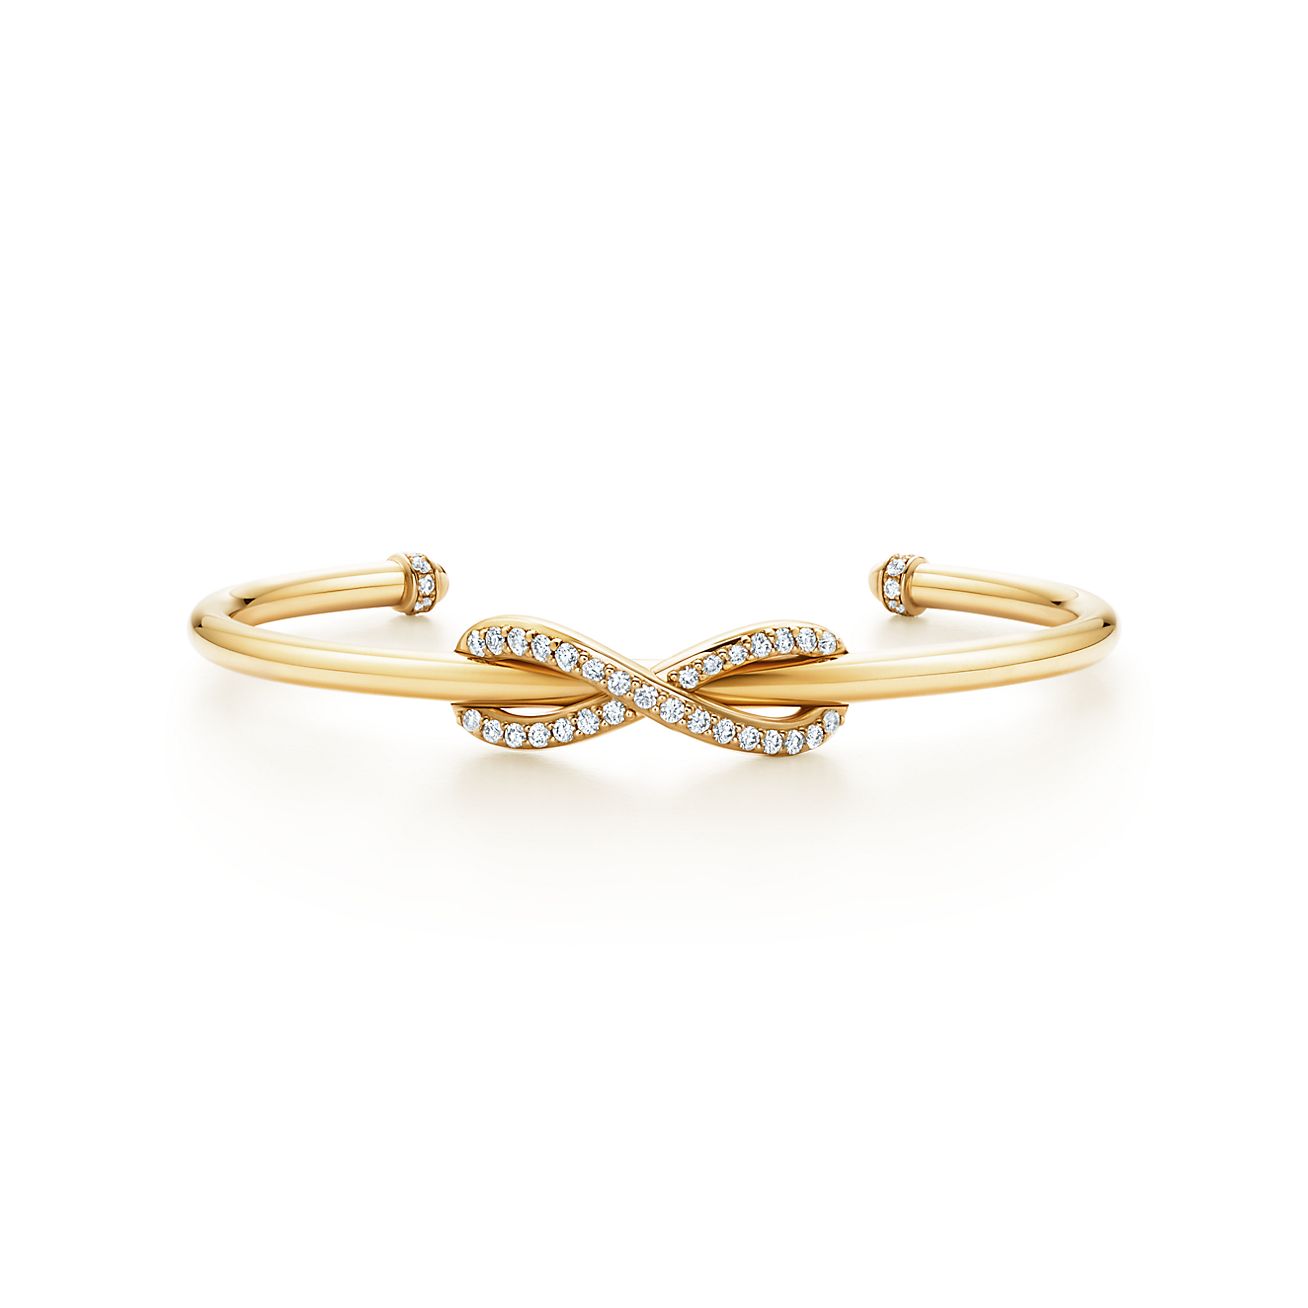 Tiffany Infinity cuff in 18k gold with 